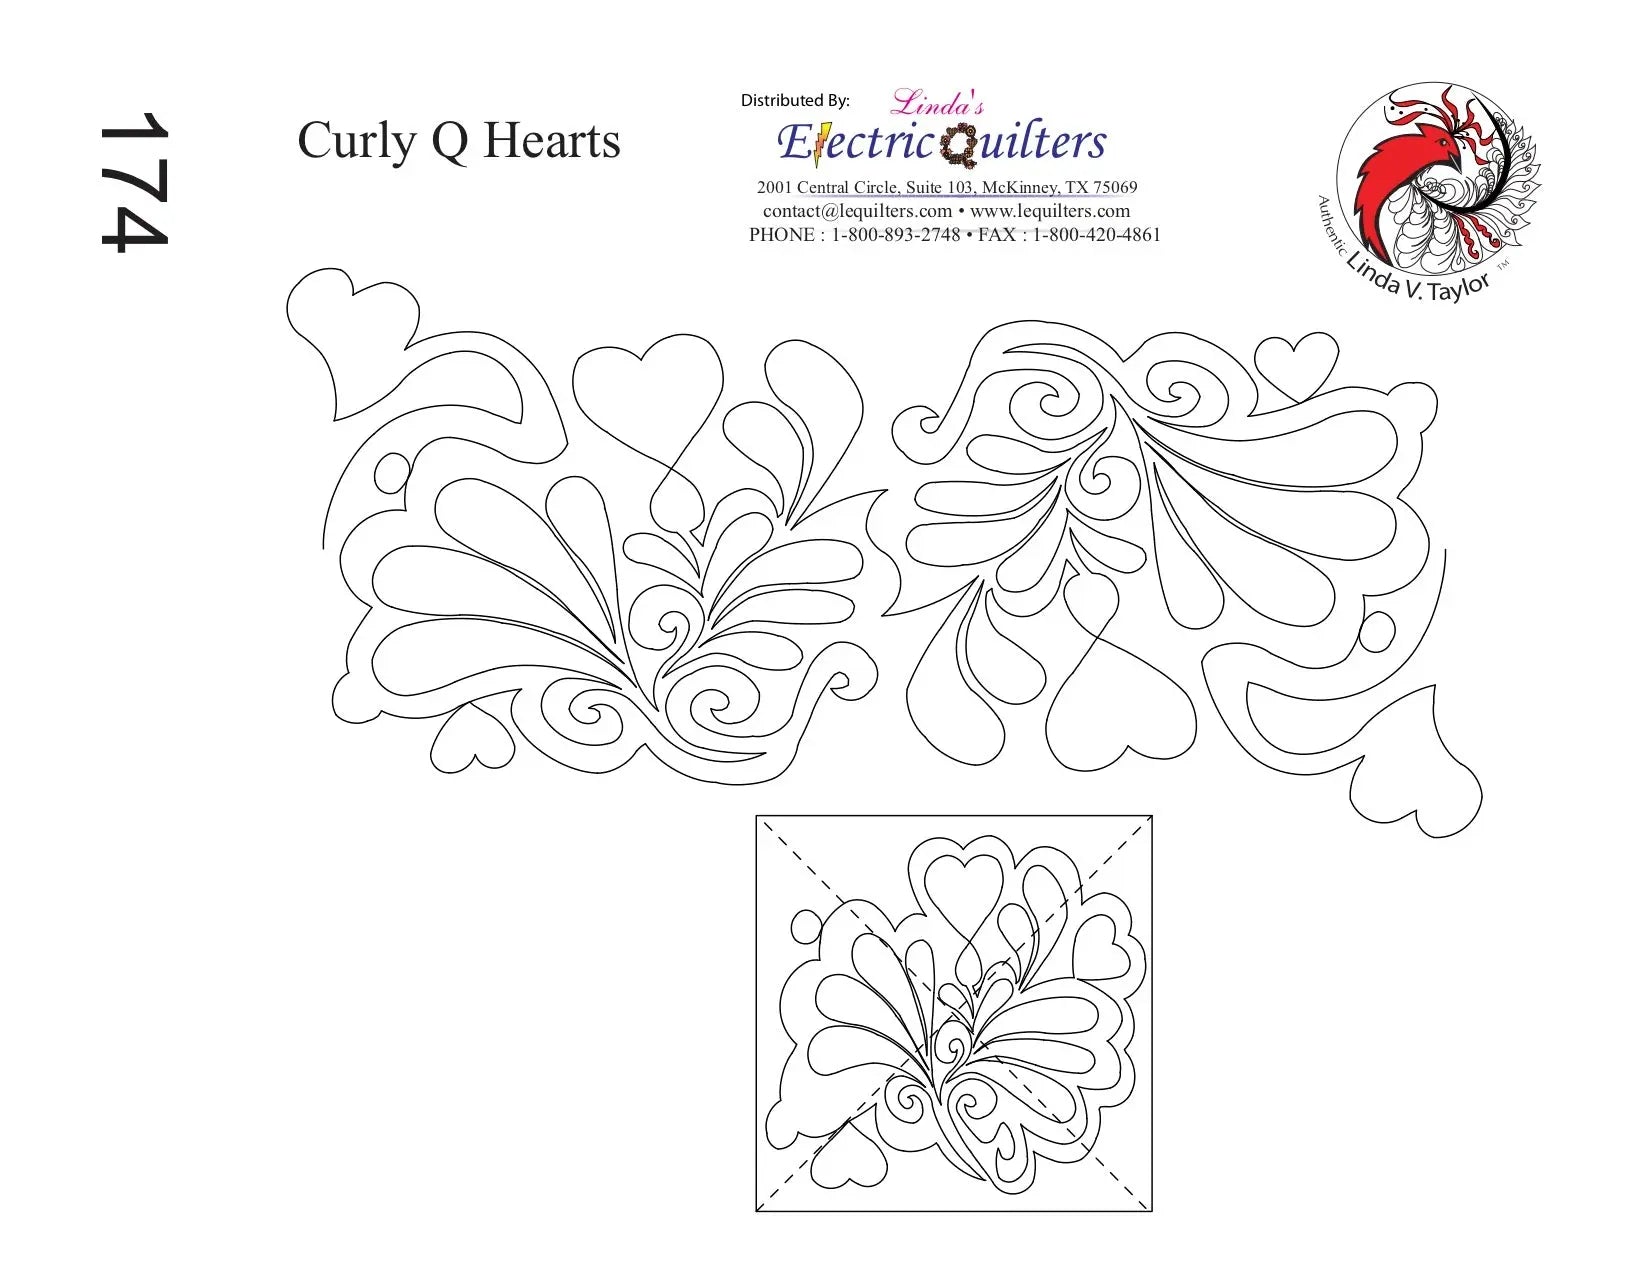 174 Curly Q Hearts Pantograph with Blocks by Linda V. Taylor - Linda's Electric Quilters